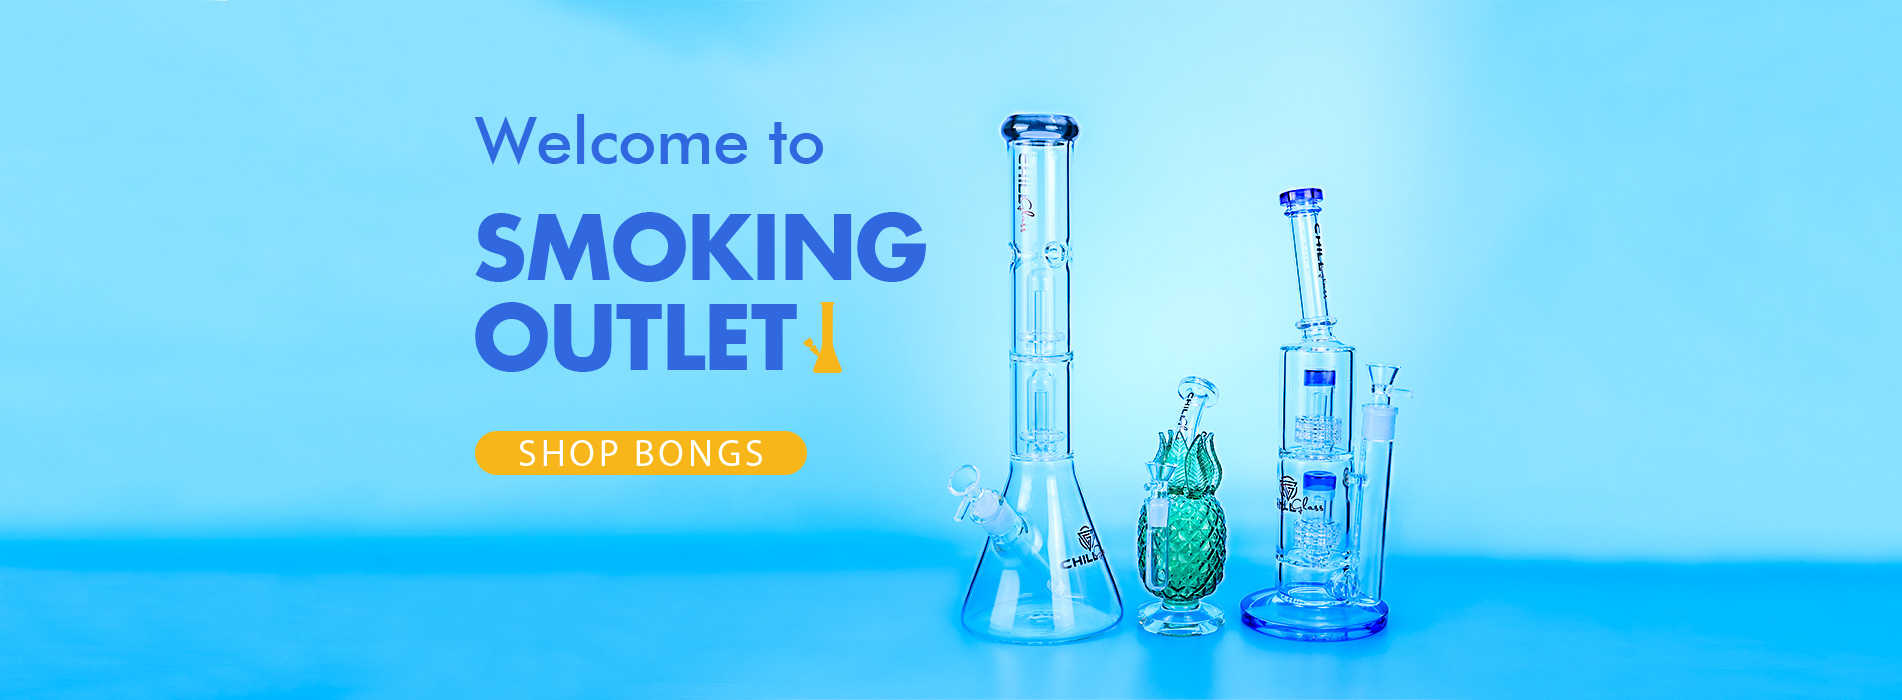 Welcome to Smoking outlet.